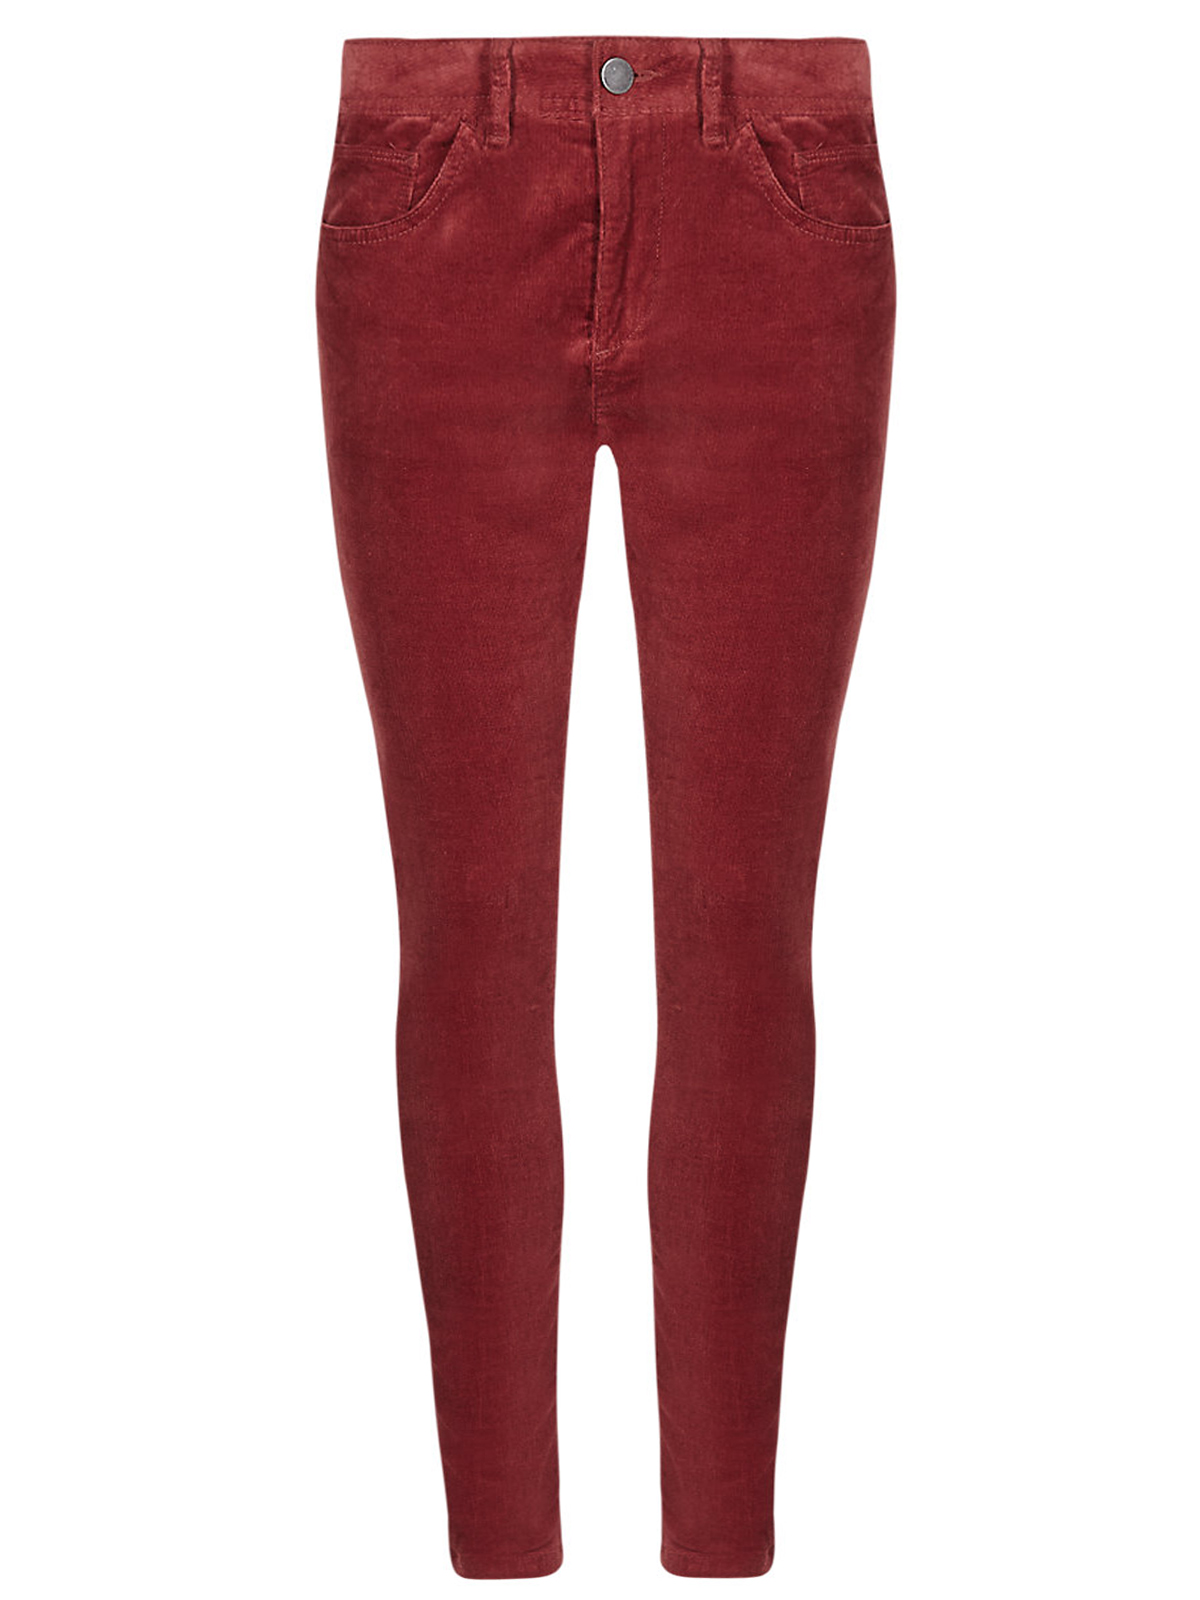 Marks and Spencer - - M&5 COGNAC Cotton Rich Corduroy Skinny Leg ...